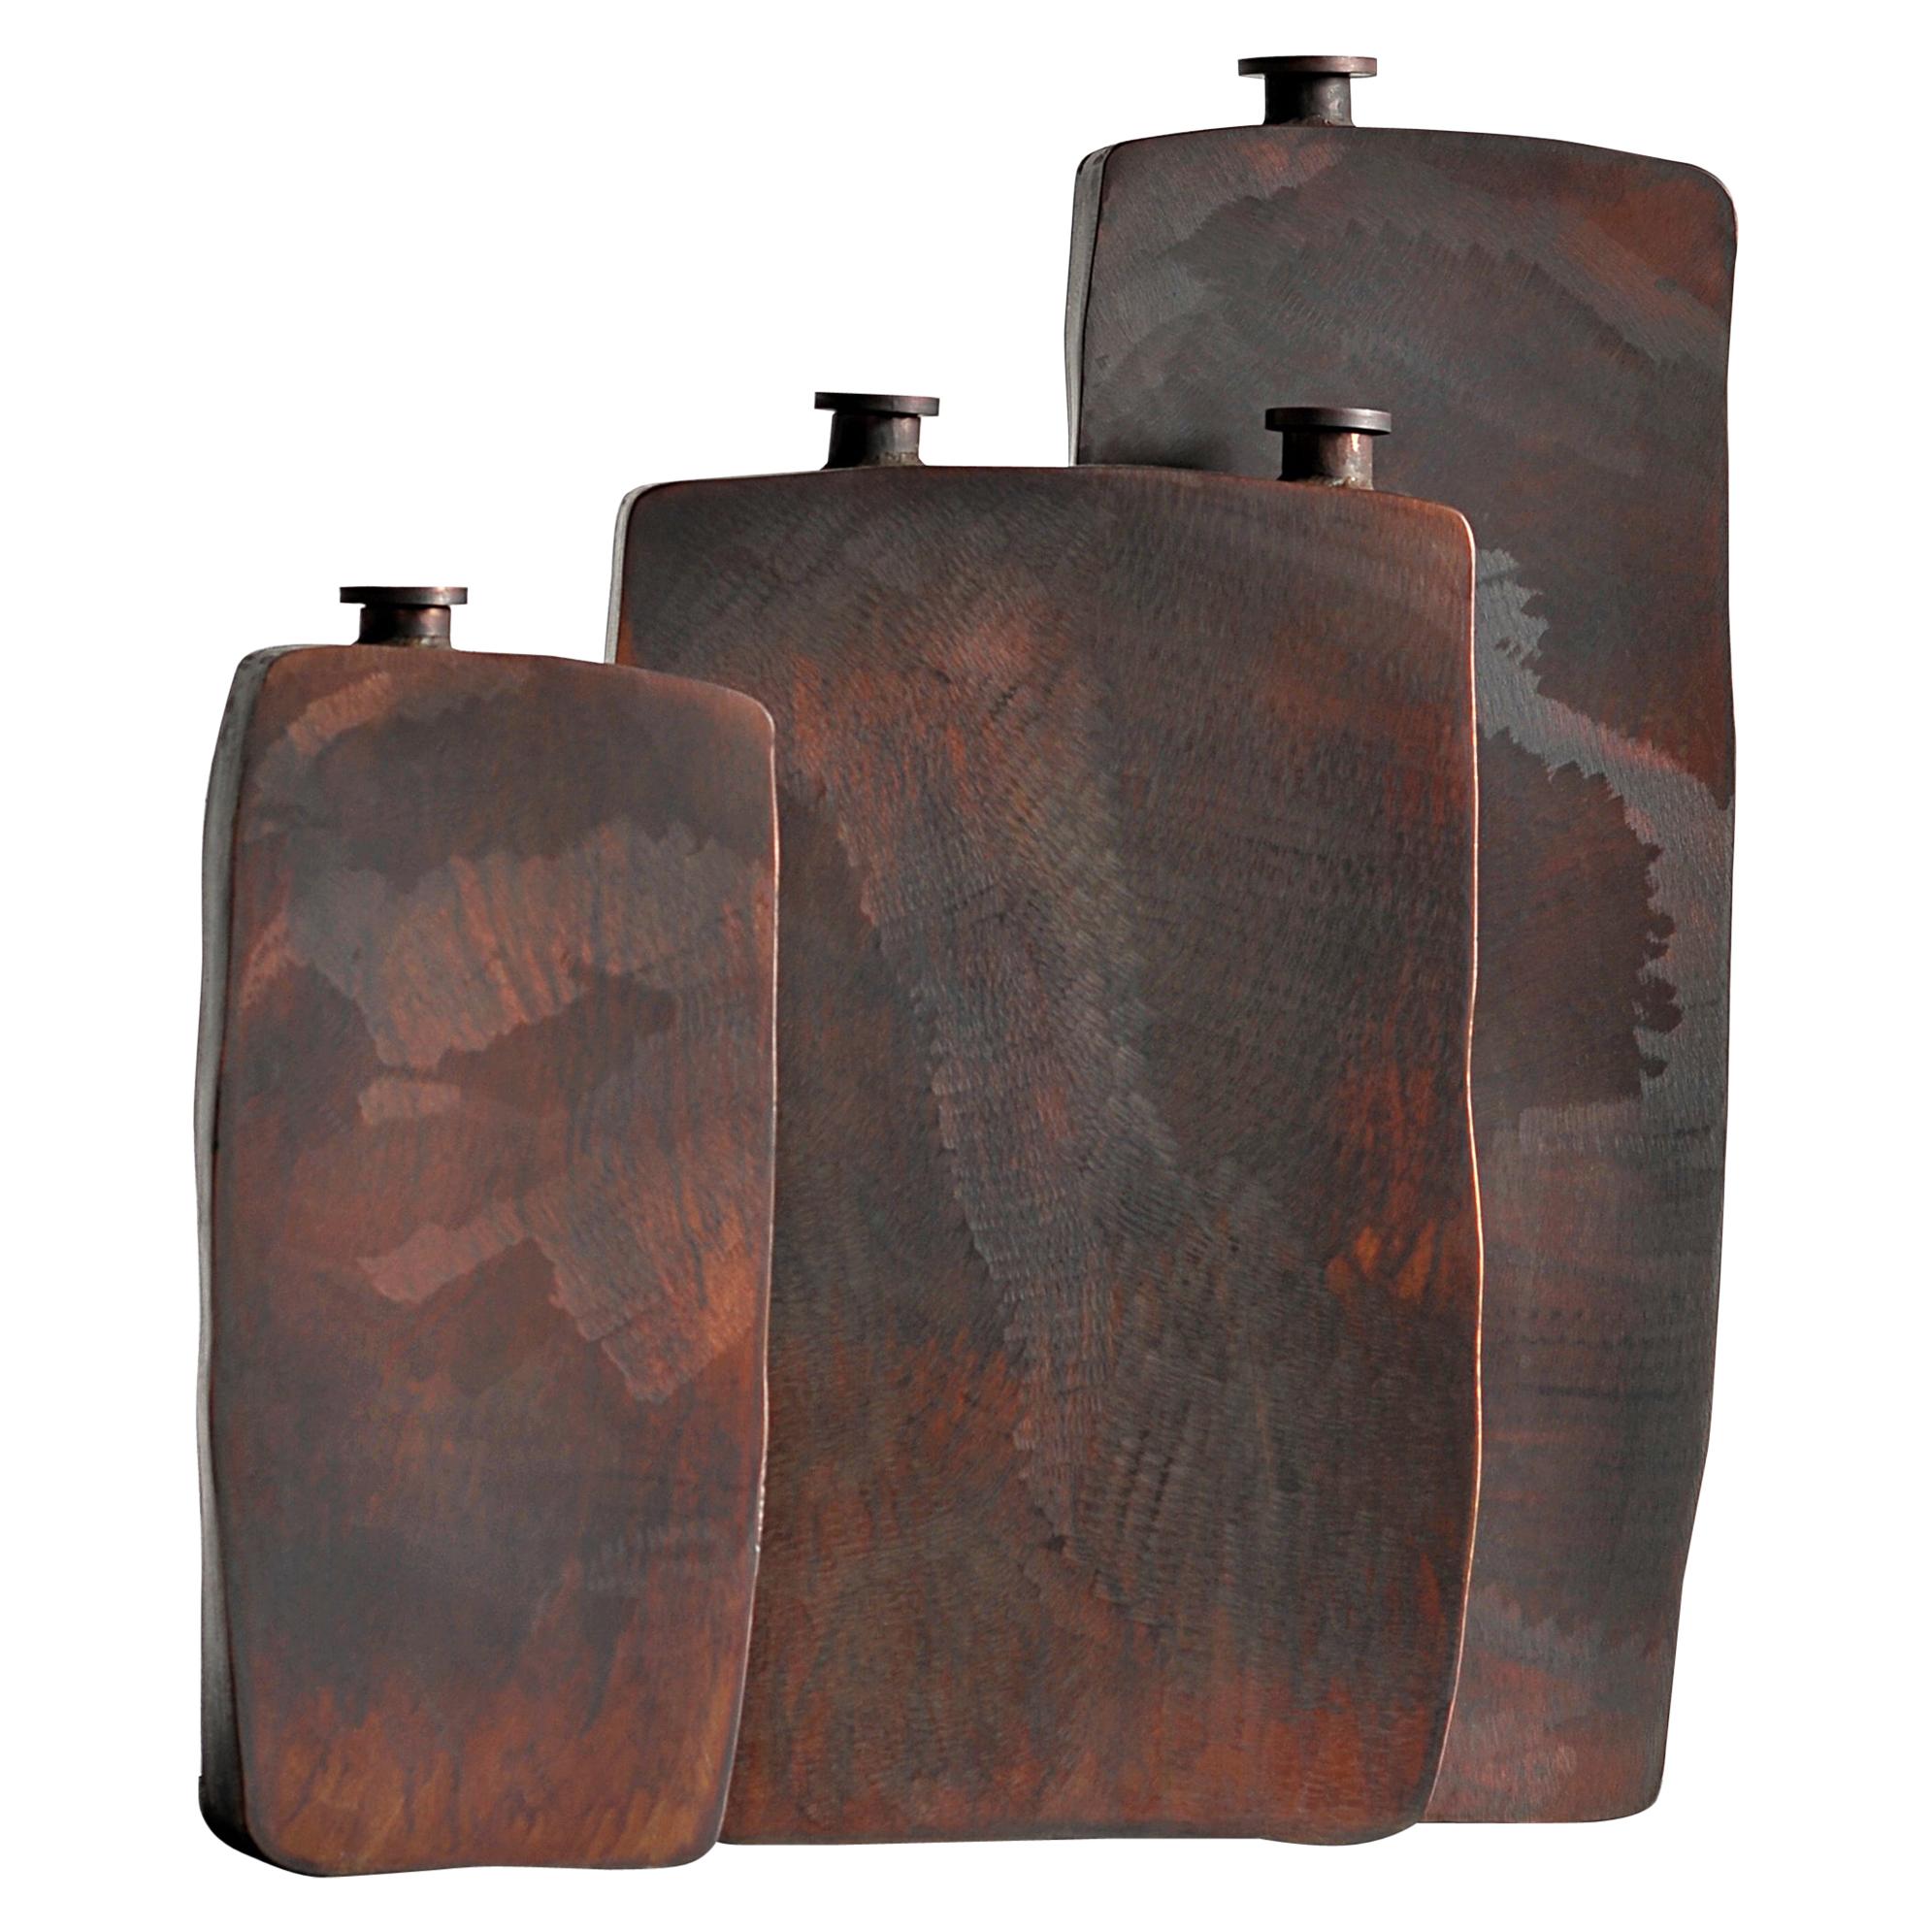 Large steel brown bottle by Lukasz Friedrich
Dimensions: Large Bottle 19.5 x 4.5 x H 50 cm

Materials: Patinated steel.